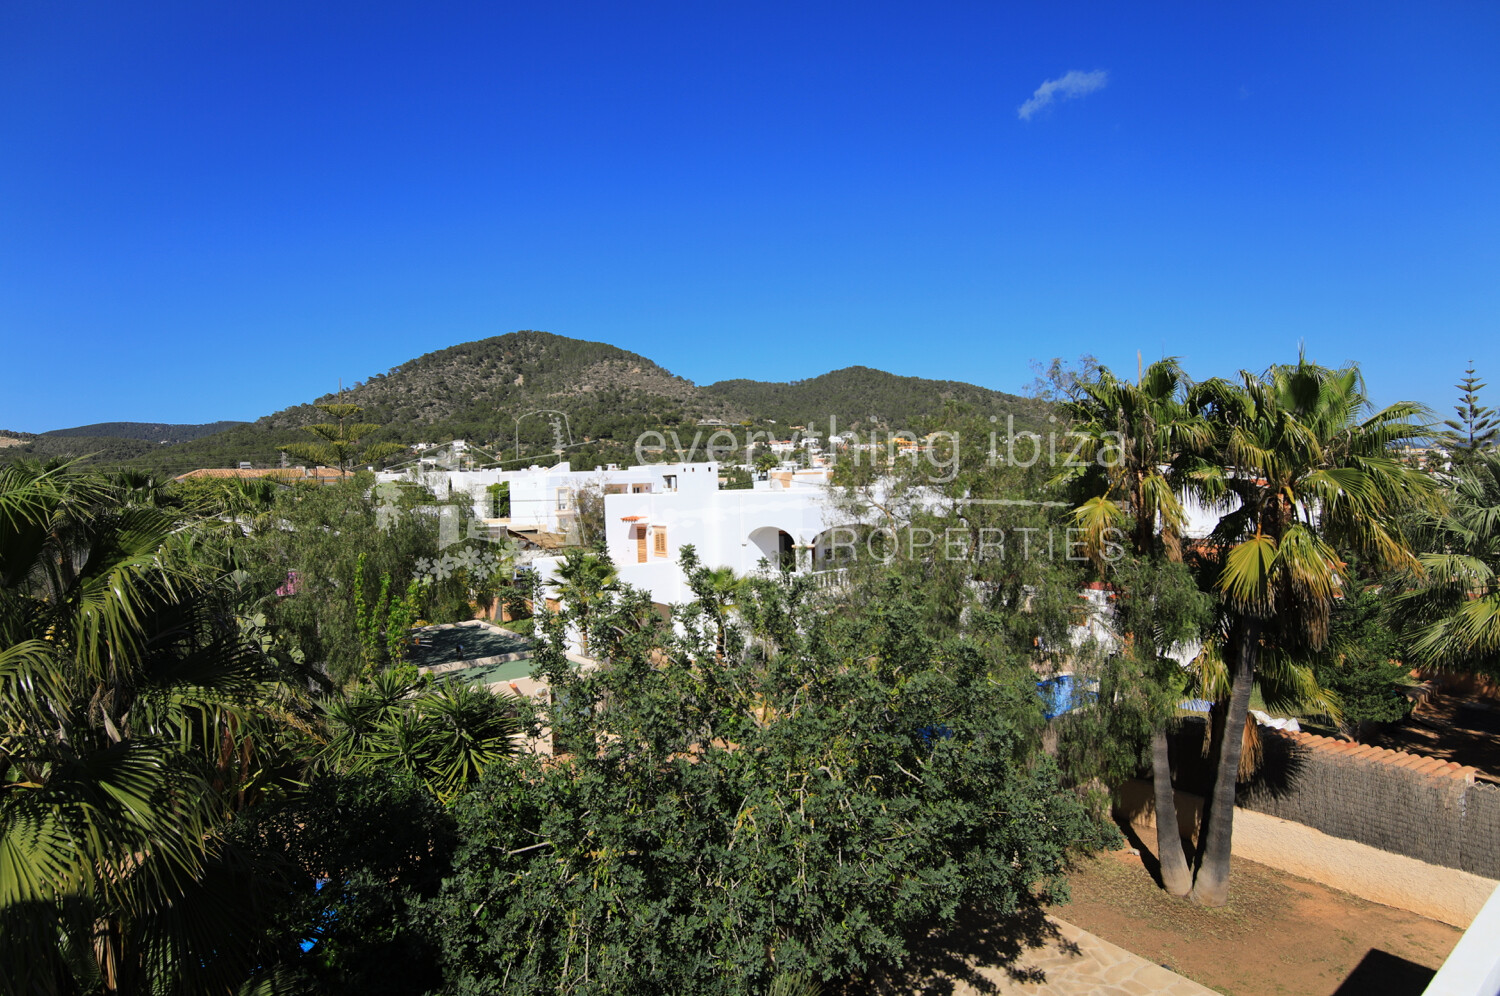 Elegant Villa with Two Independent Apartments San Jordi, ref. 1654, for sale in Ibiza by everything ibiza Properties